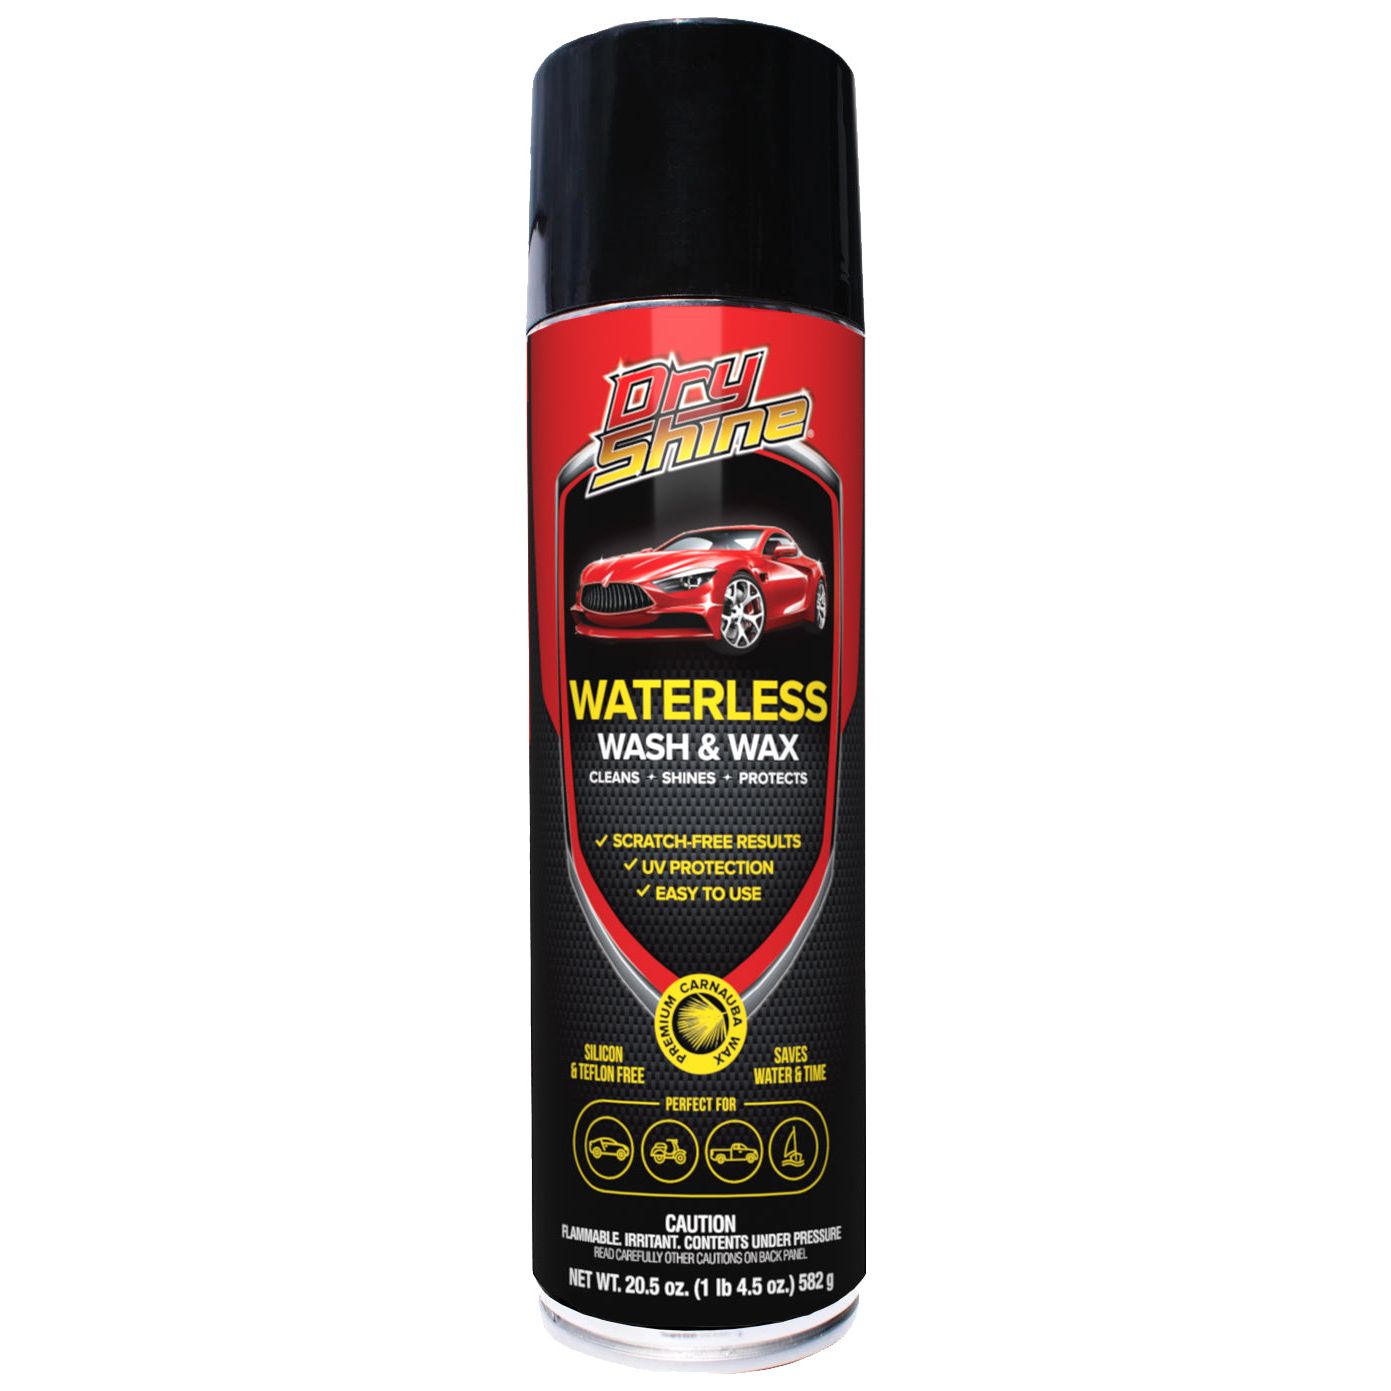 SansZo Total Detail Waterless Car Wash Wax and Polish Spray - Cleans,  Shines and Protects with one